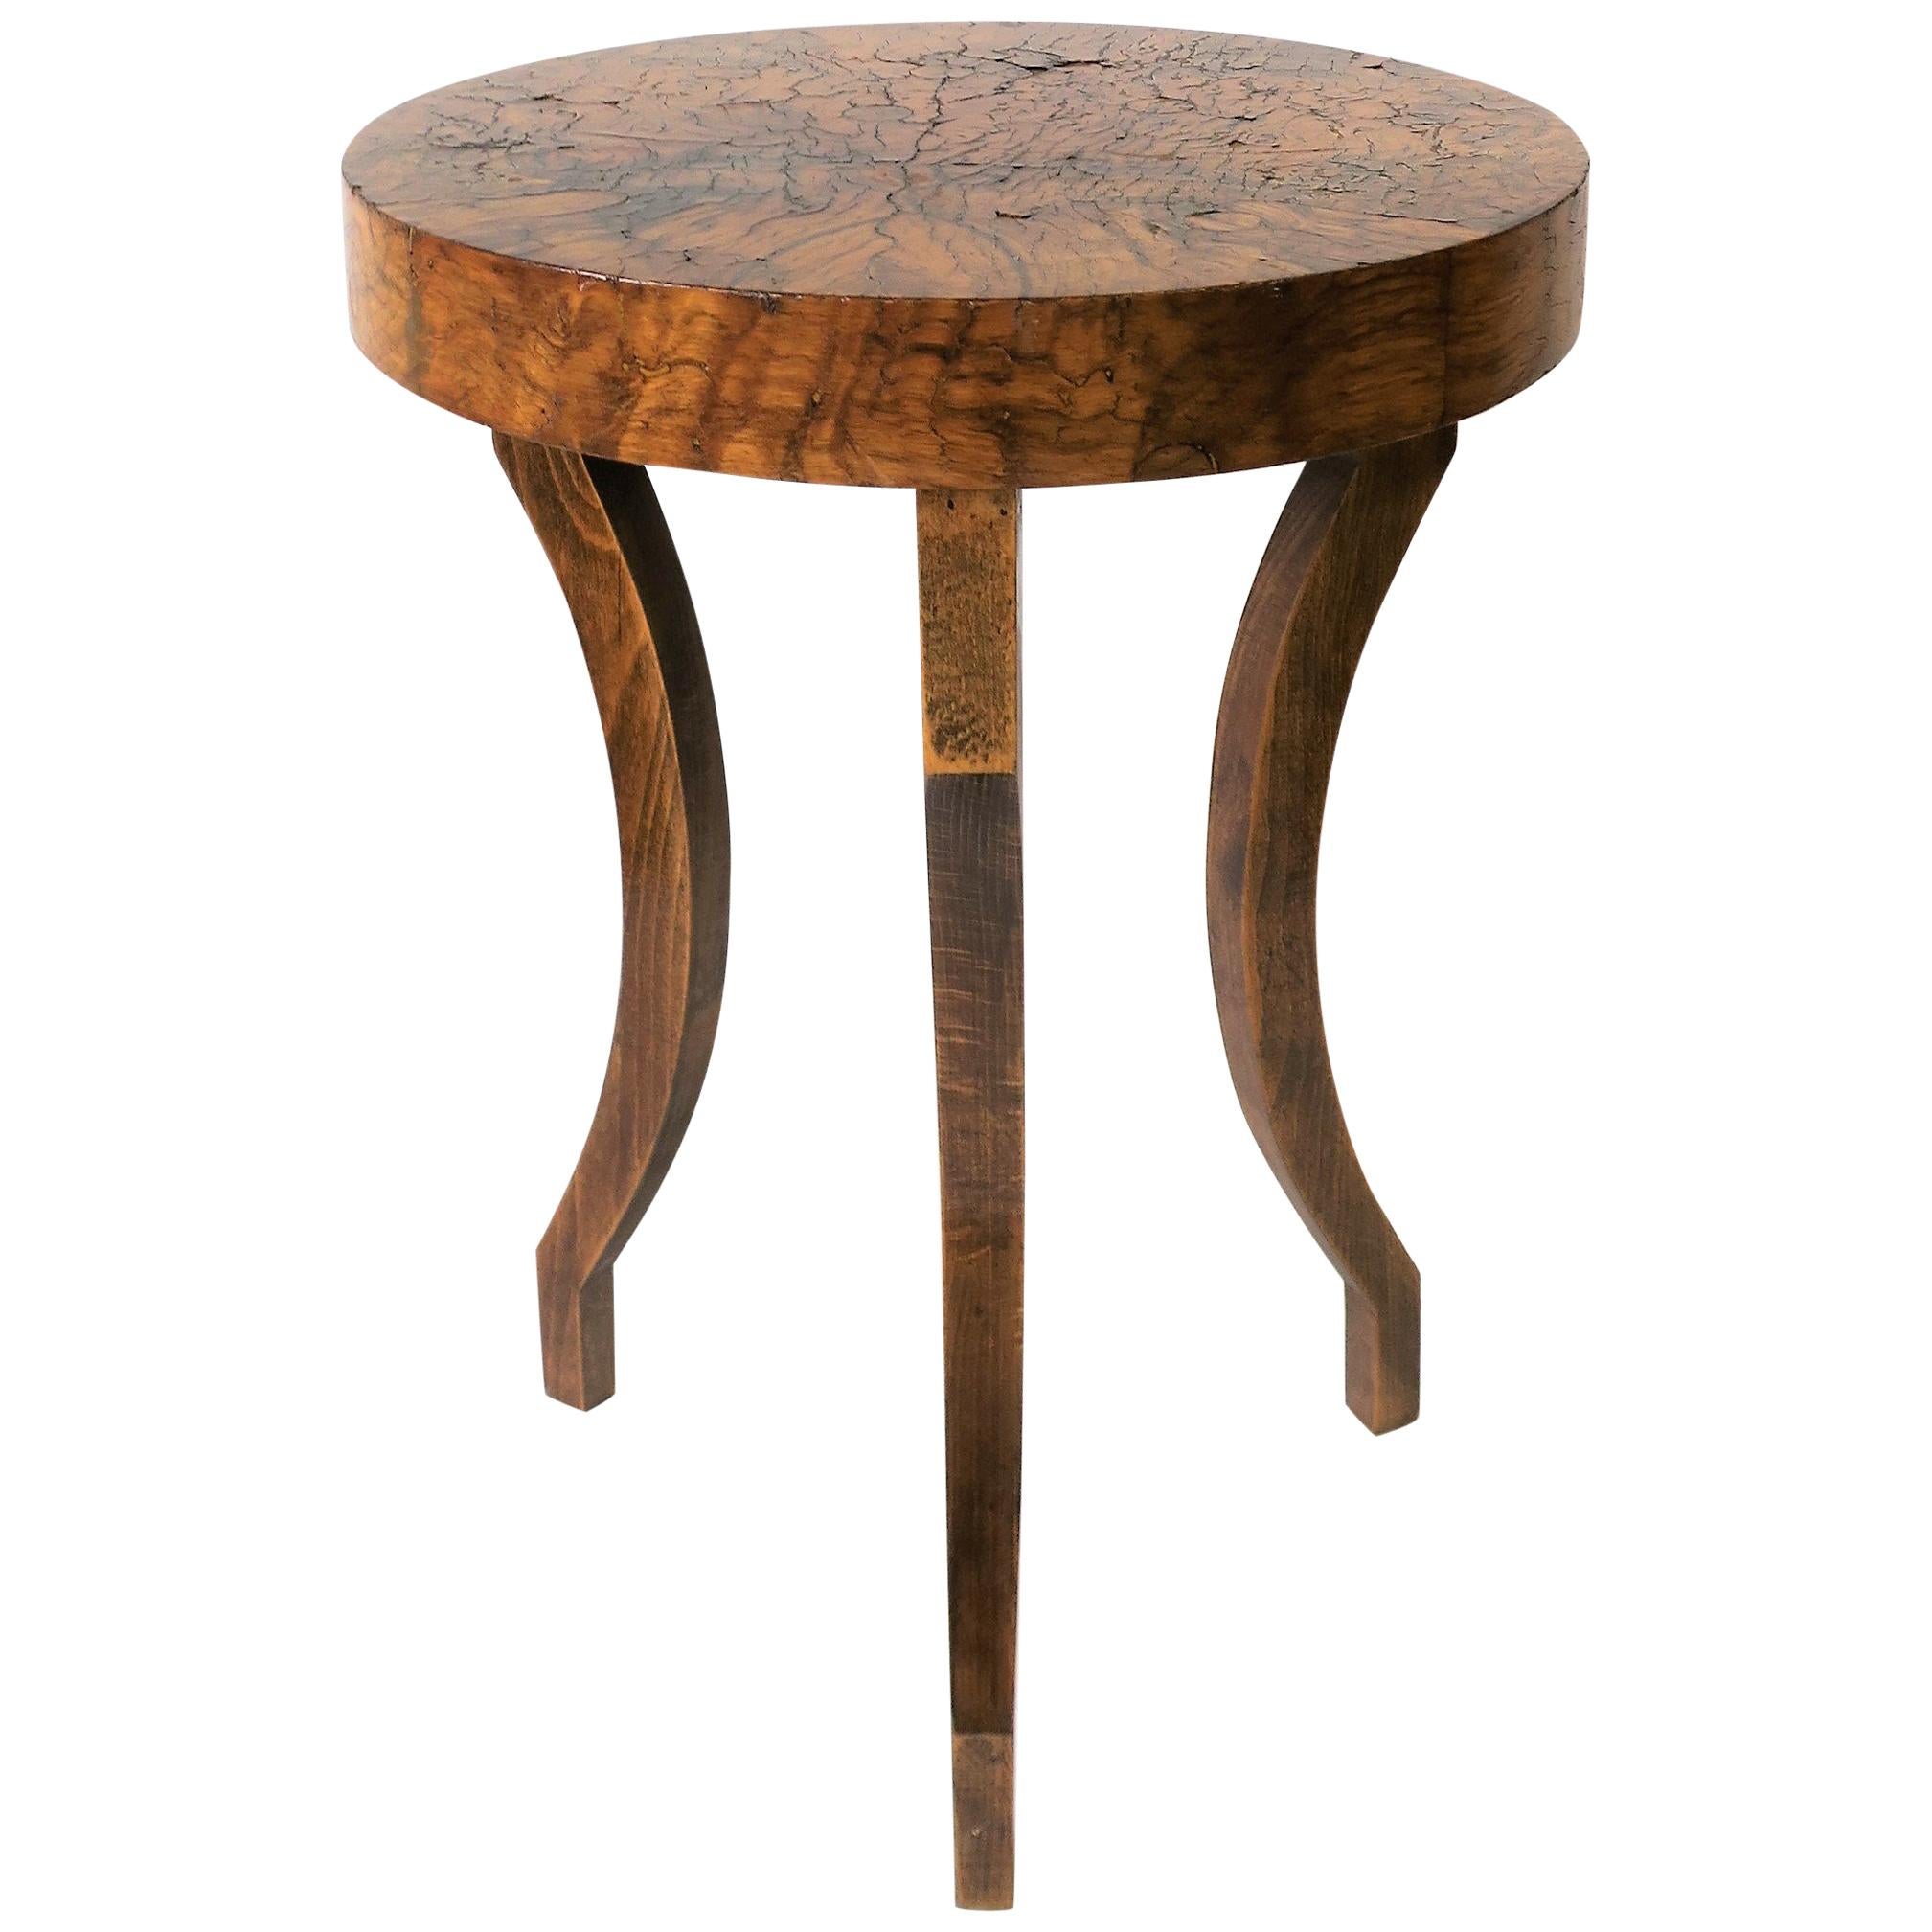 Small Round Wood Gueridon Side or Drinks Table